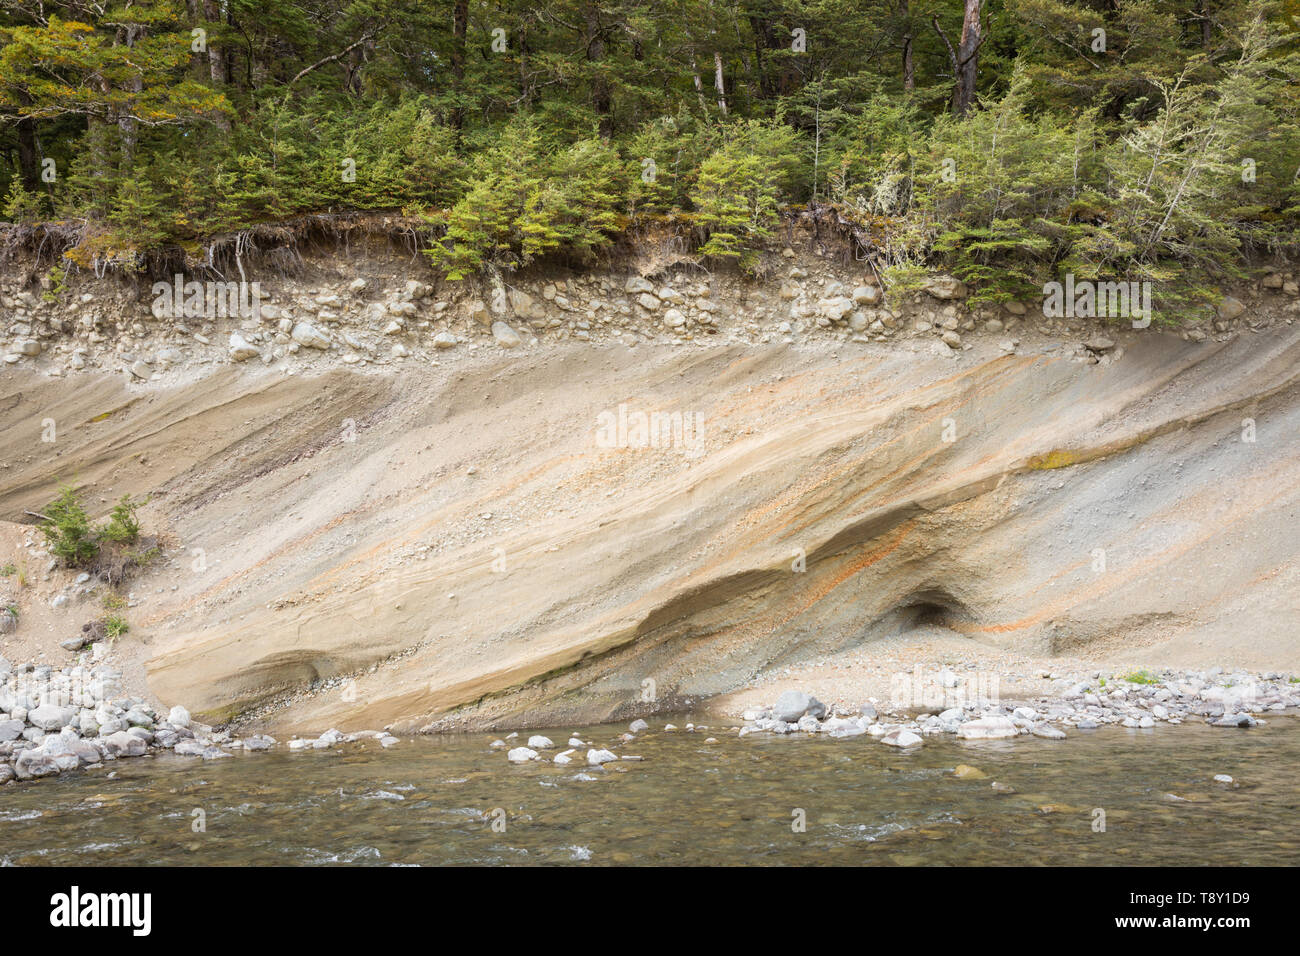 River or fluvial erosion on a river bank, South Island, New Zealand Stock Photo